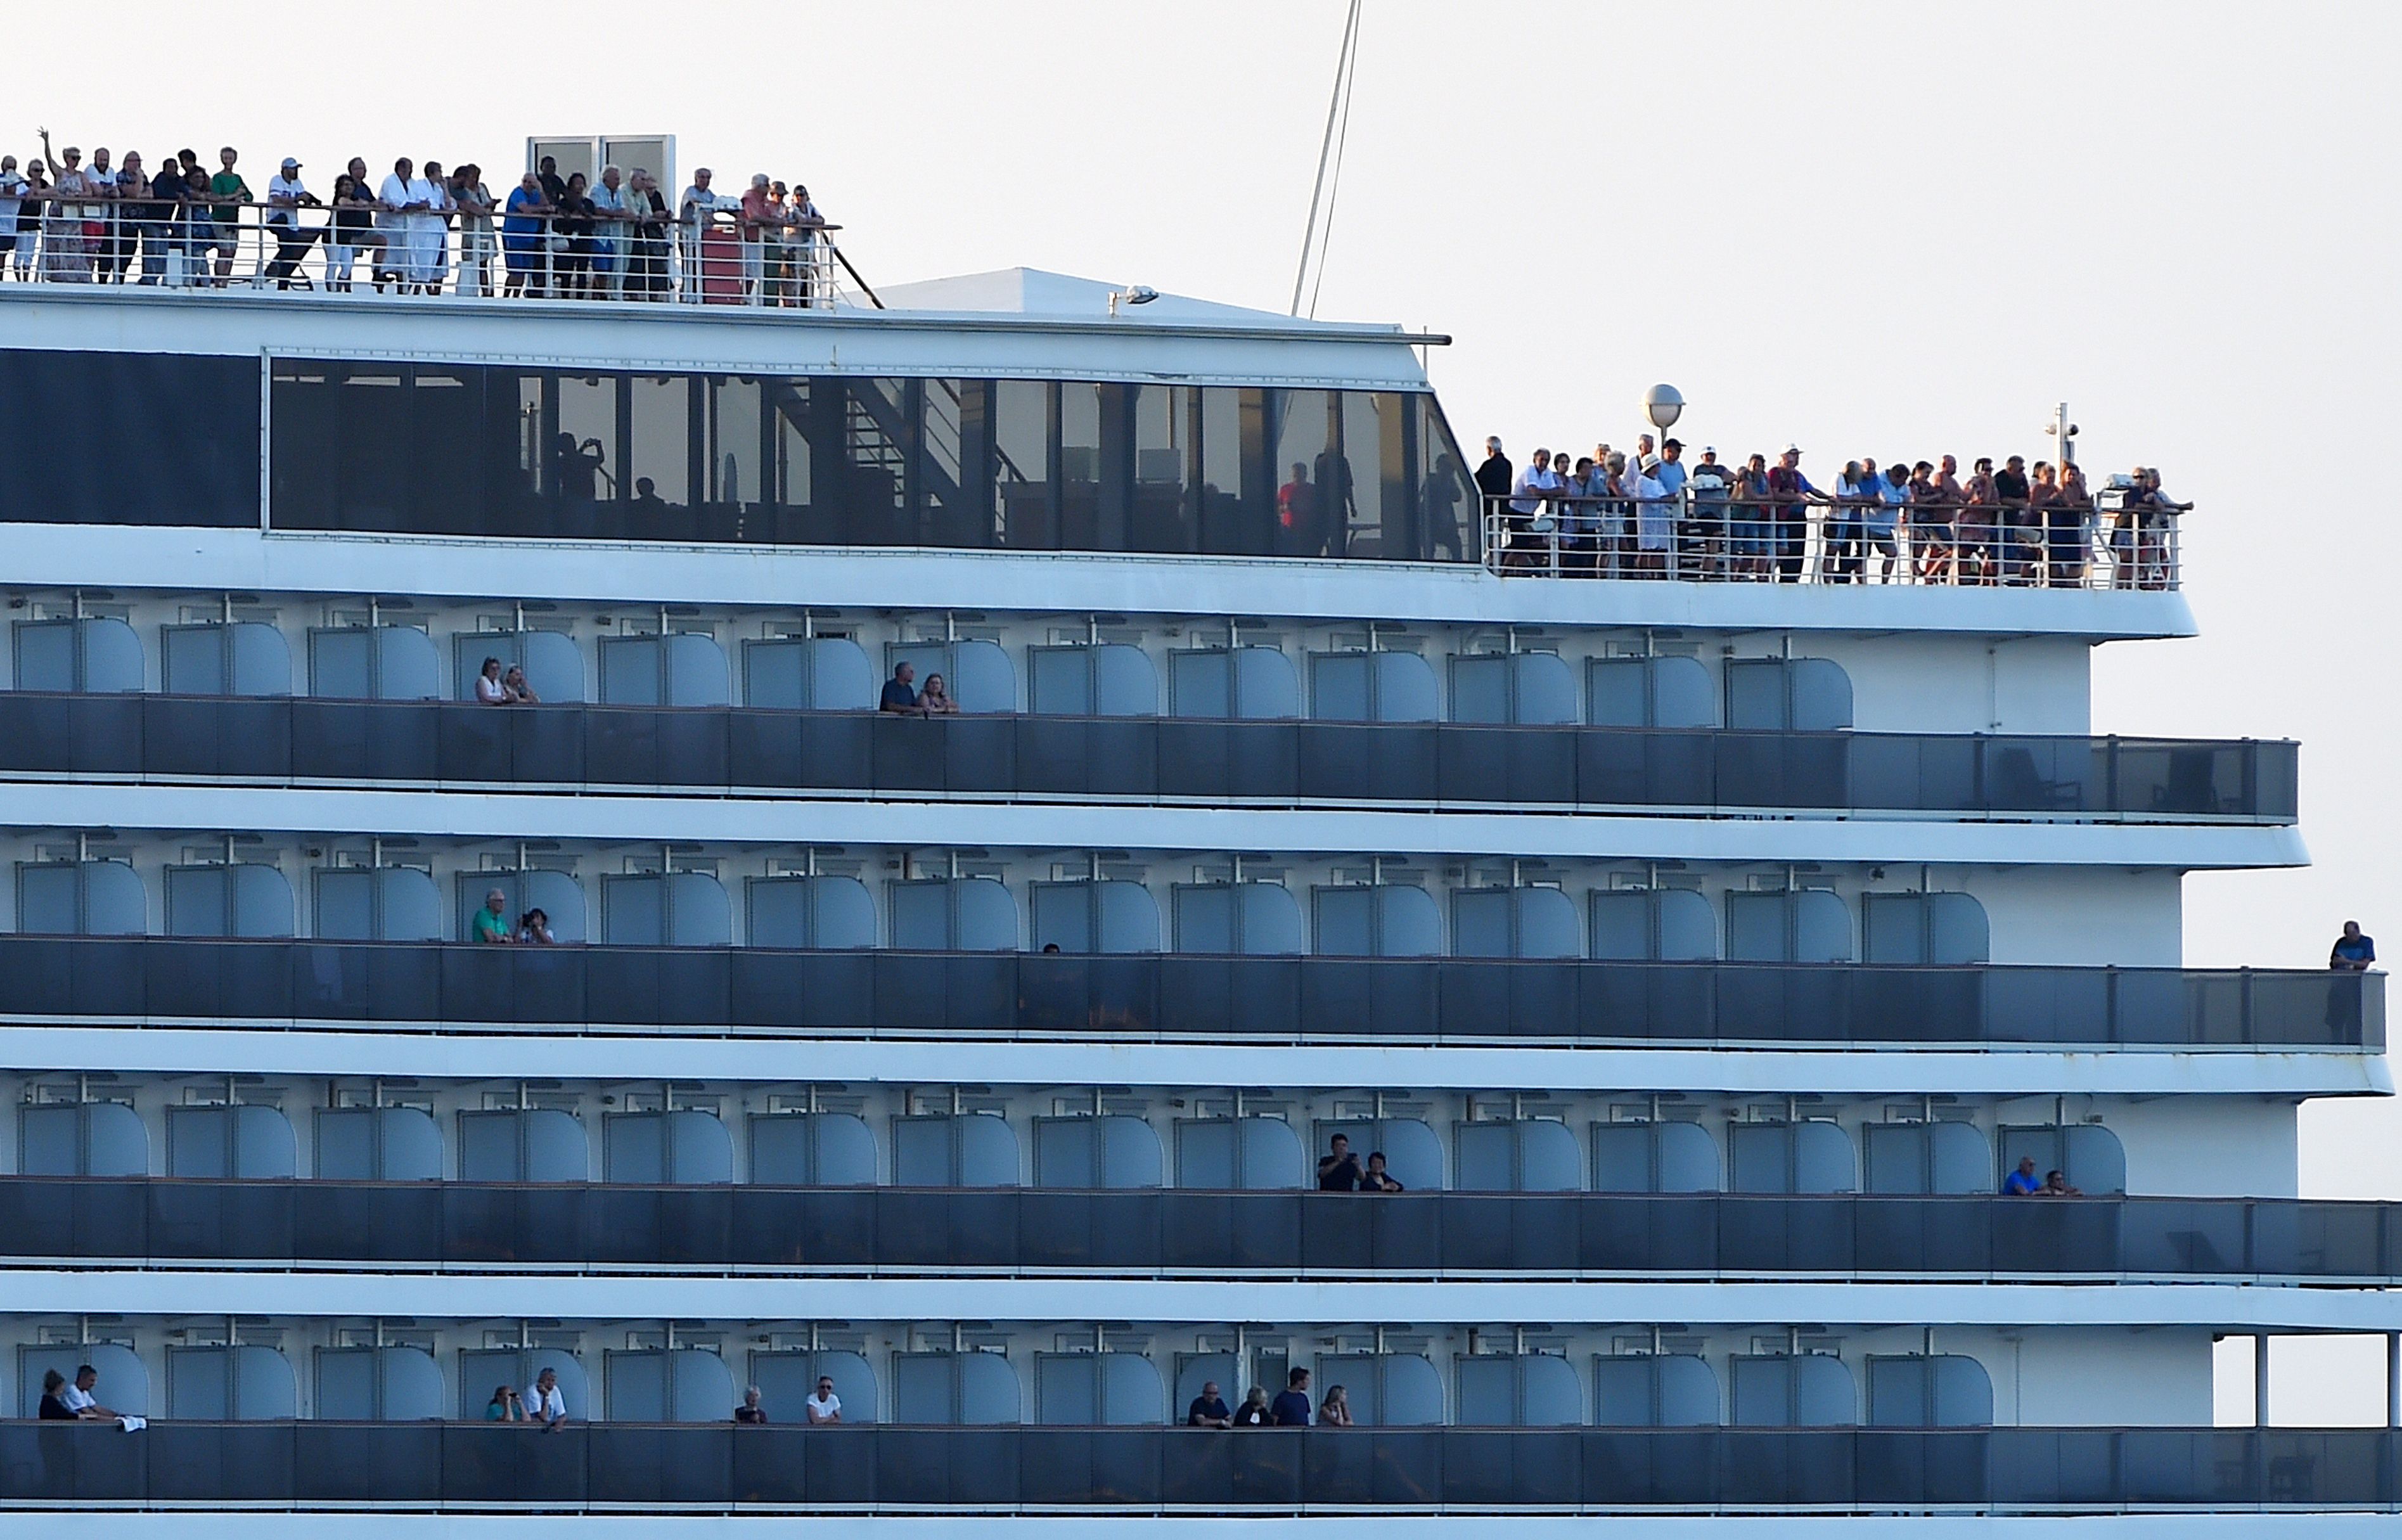 Passengers watch as the Westerdam cruise ship approaches the port in Sihanoukville on Cambodia's southern coast on Feb. 13, where the liner had received permission to dock after being refused entry at other Asian ports due to fears of the COVID-19 coronavirus.